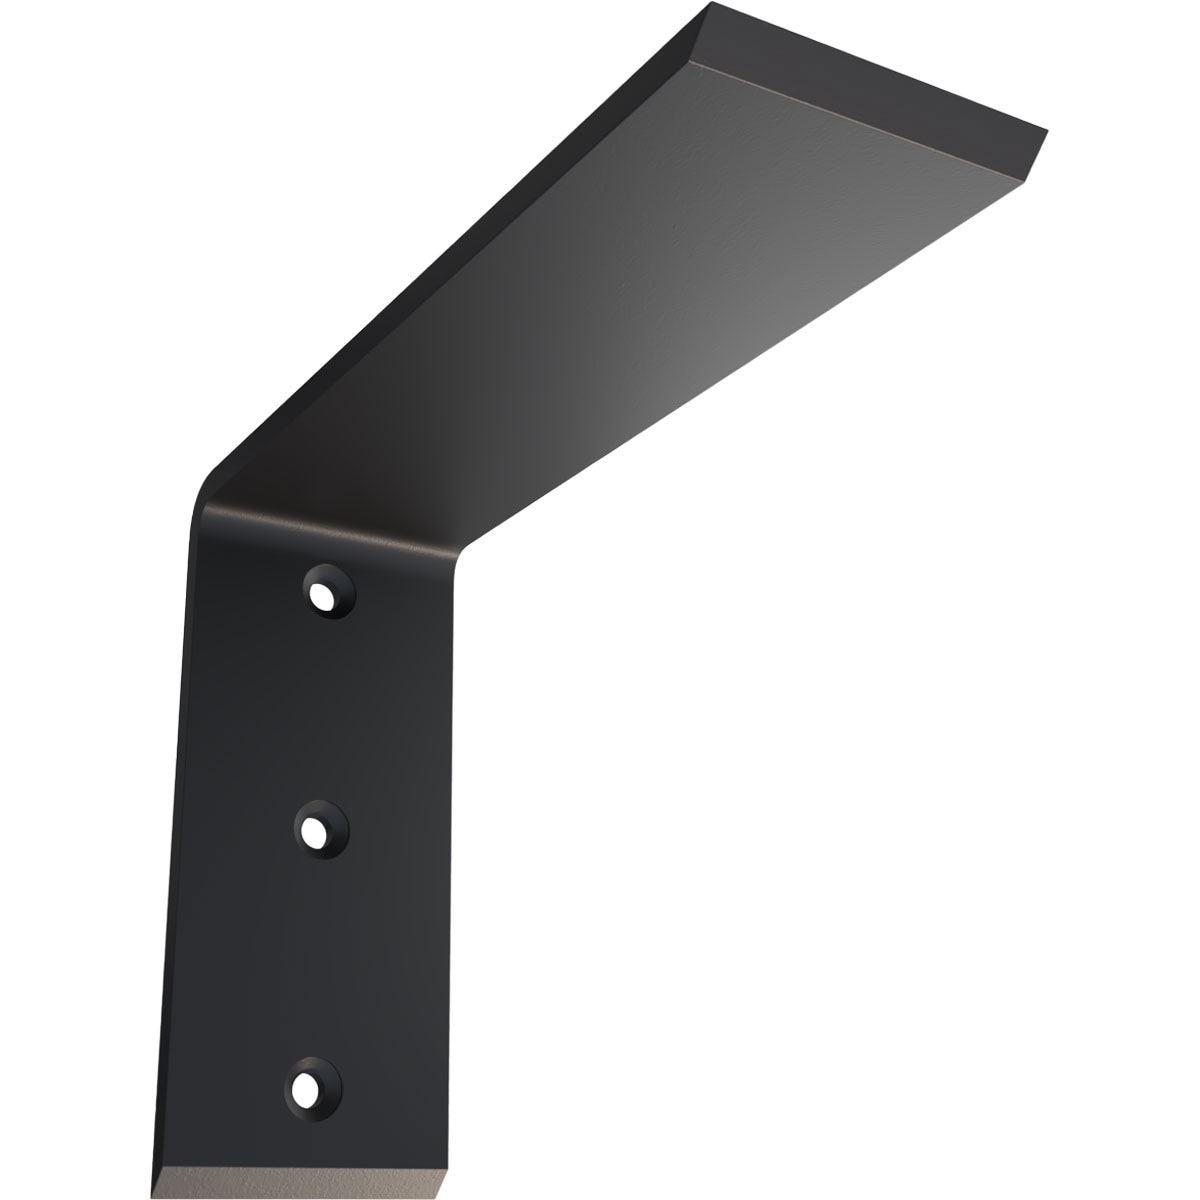 Mounting angle bracket 1/4 inch painted steel x 4 1/4 x 2 1/2 x 4 in.